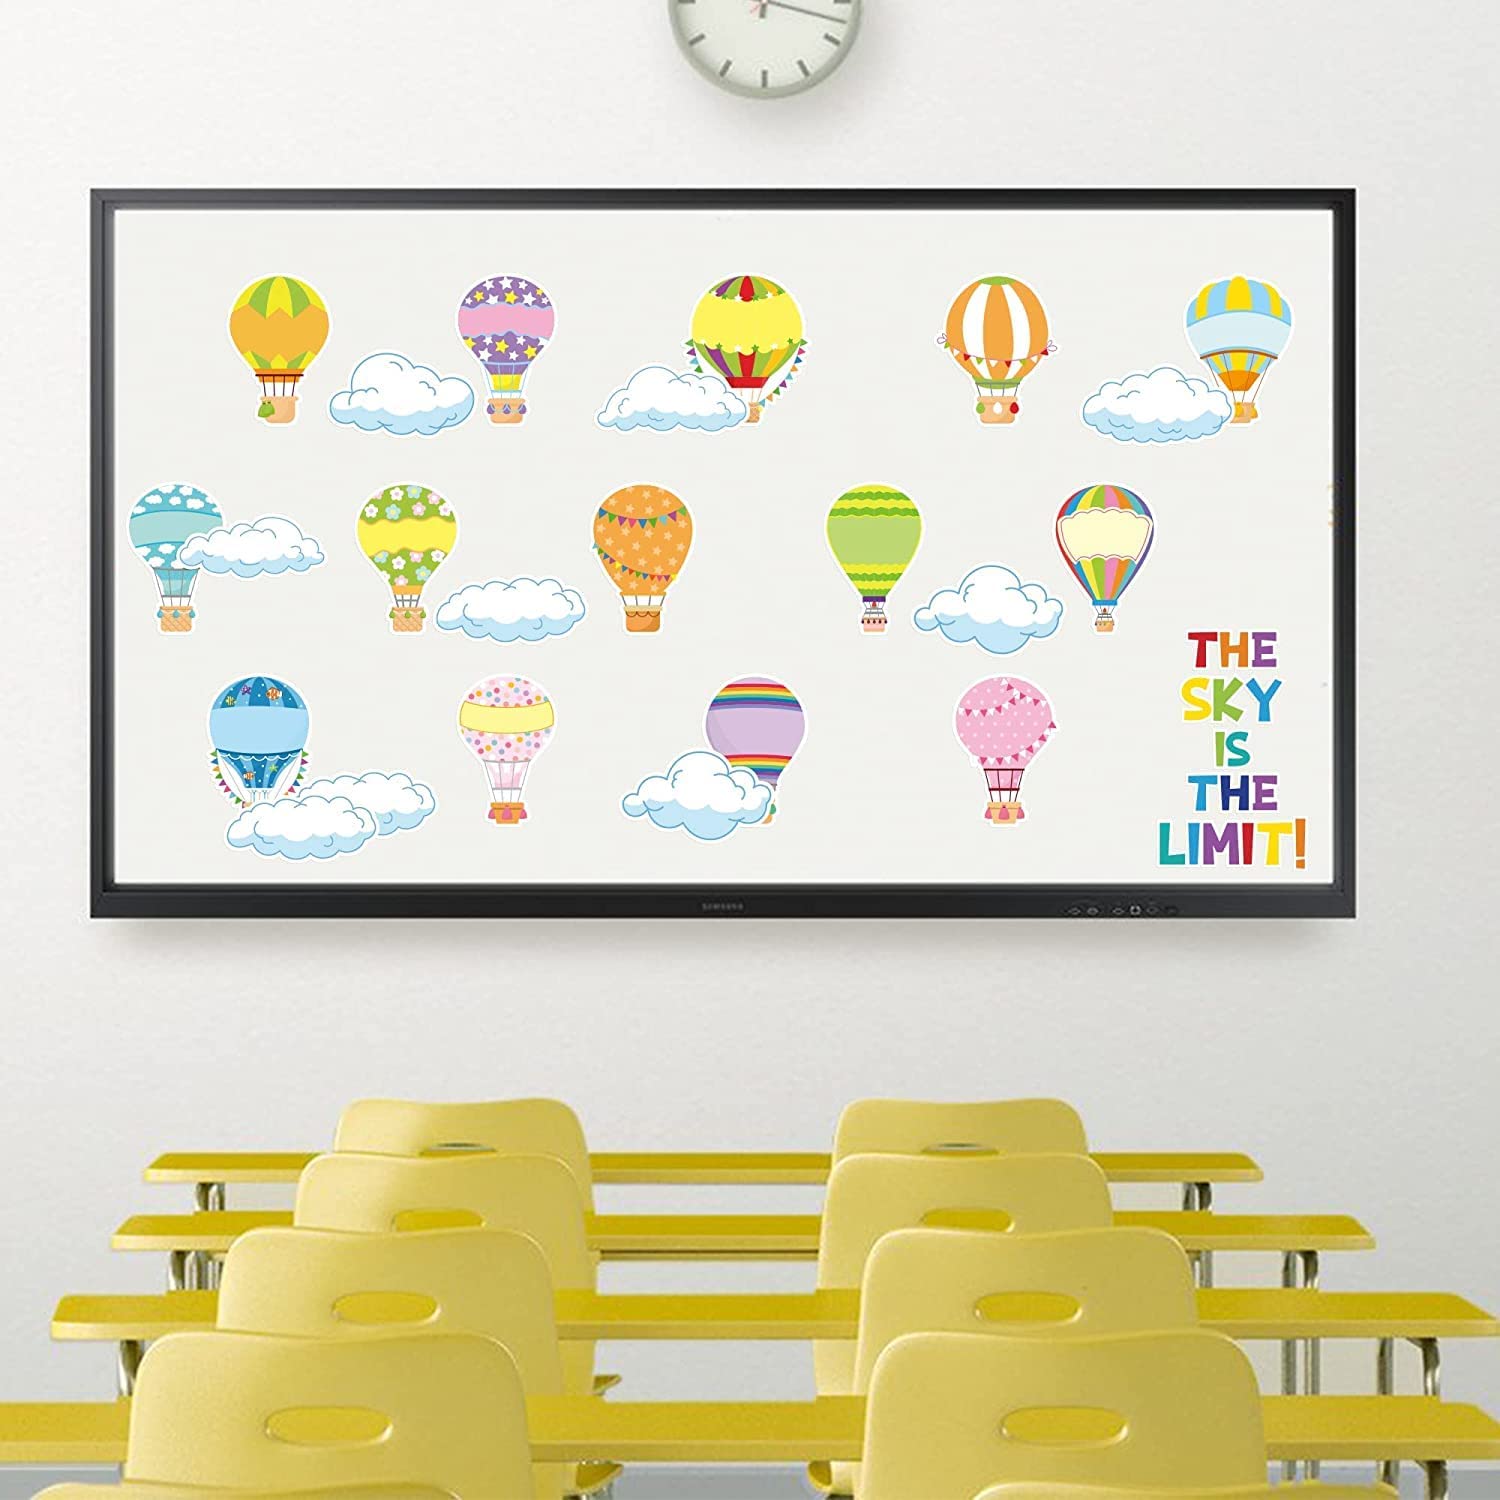 65 decorative pieces for classrooms and children's rooms with encouraging phrases for children